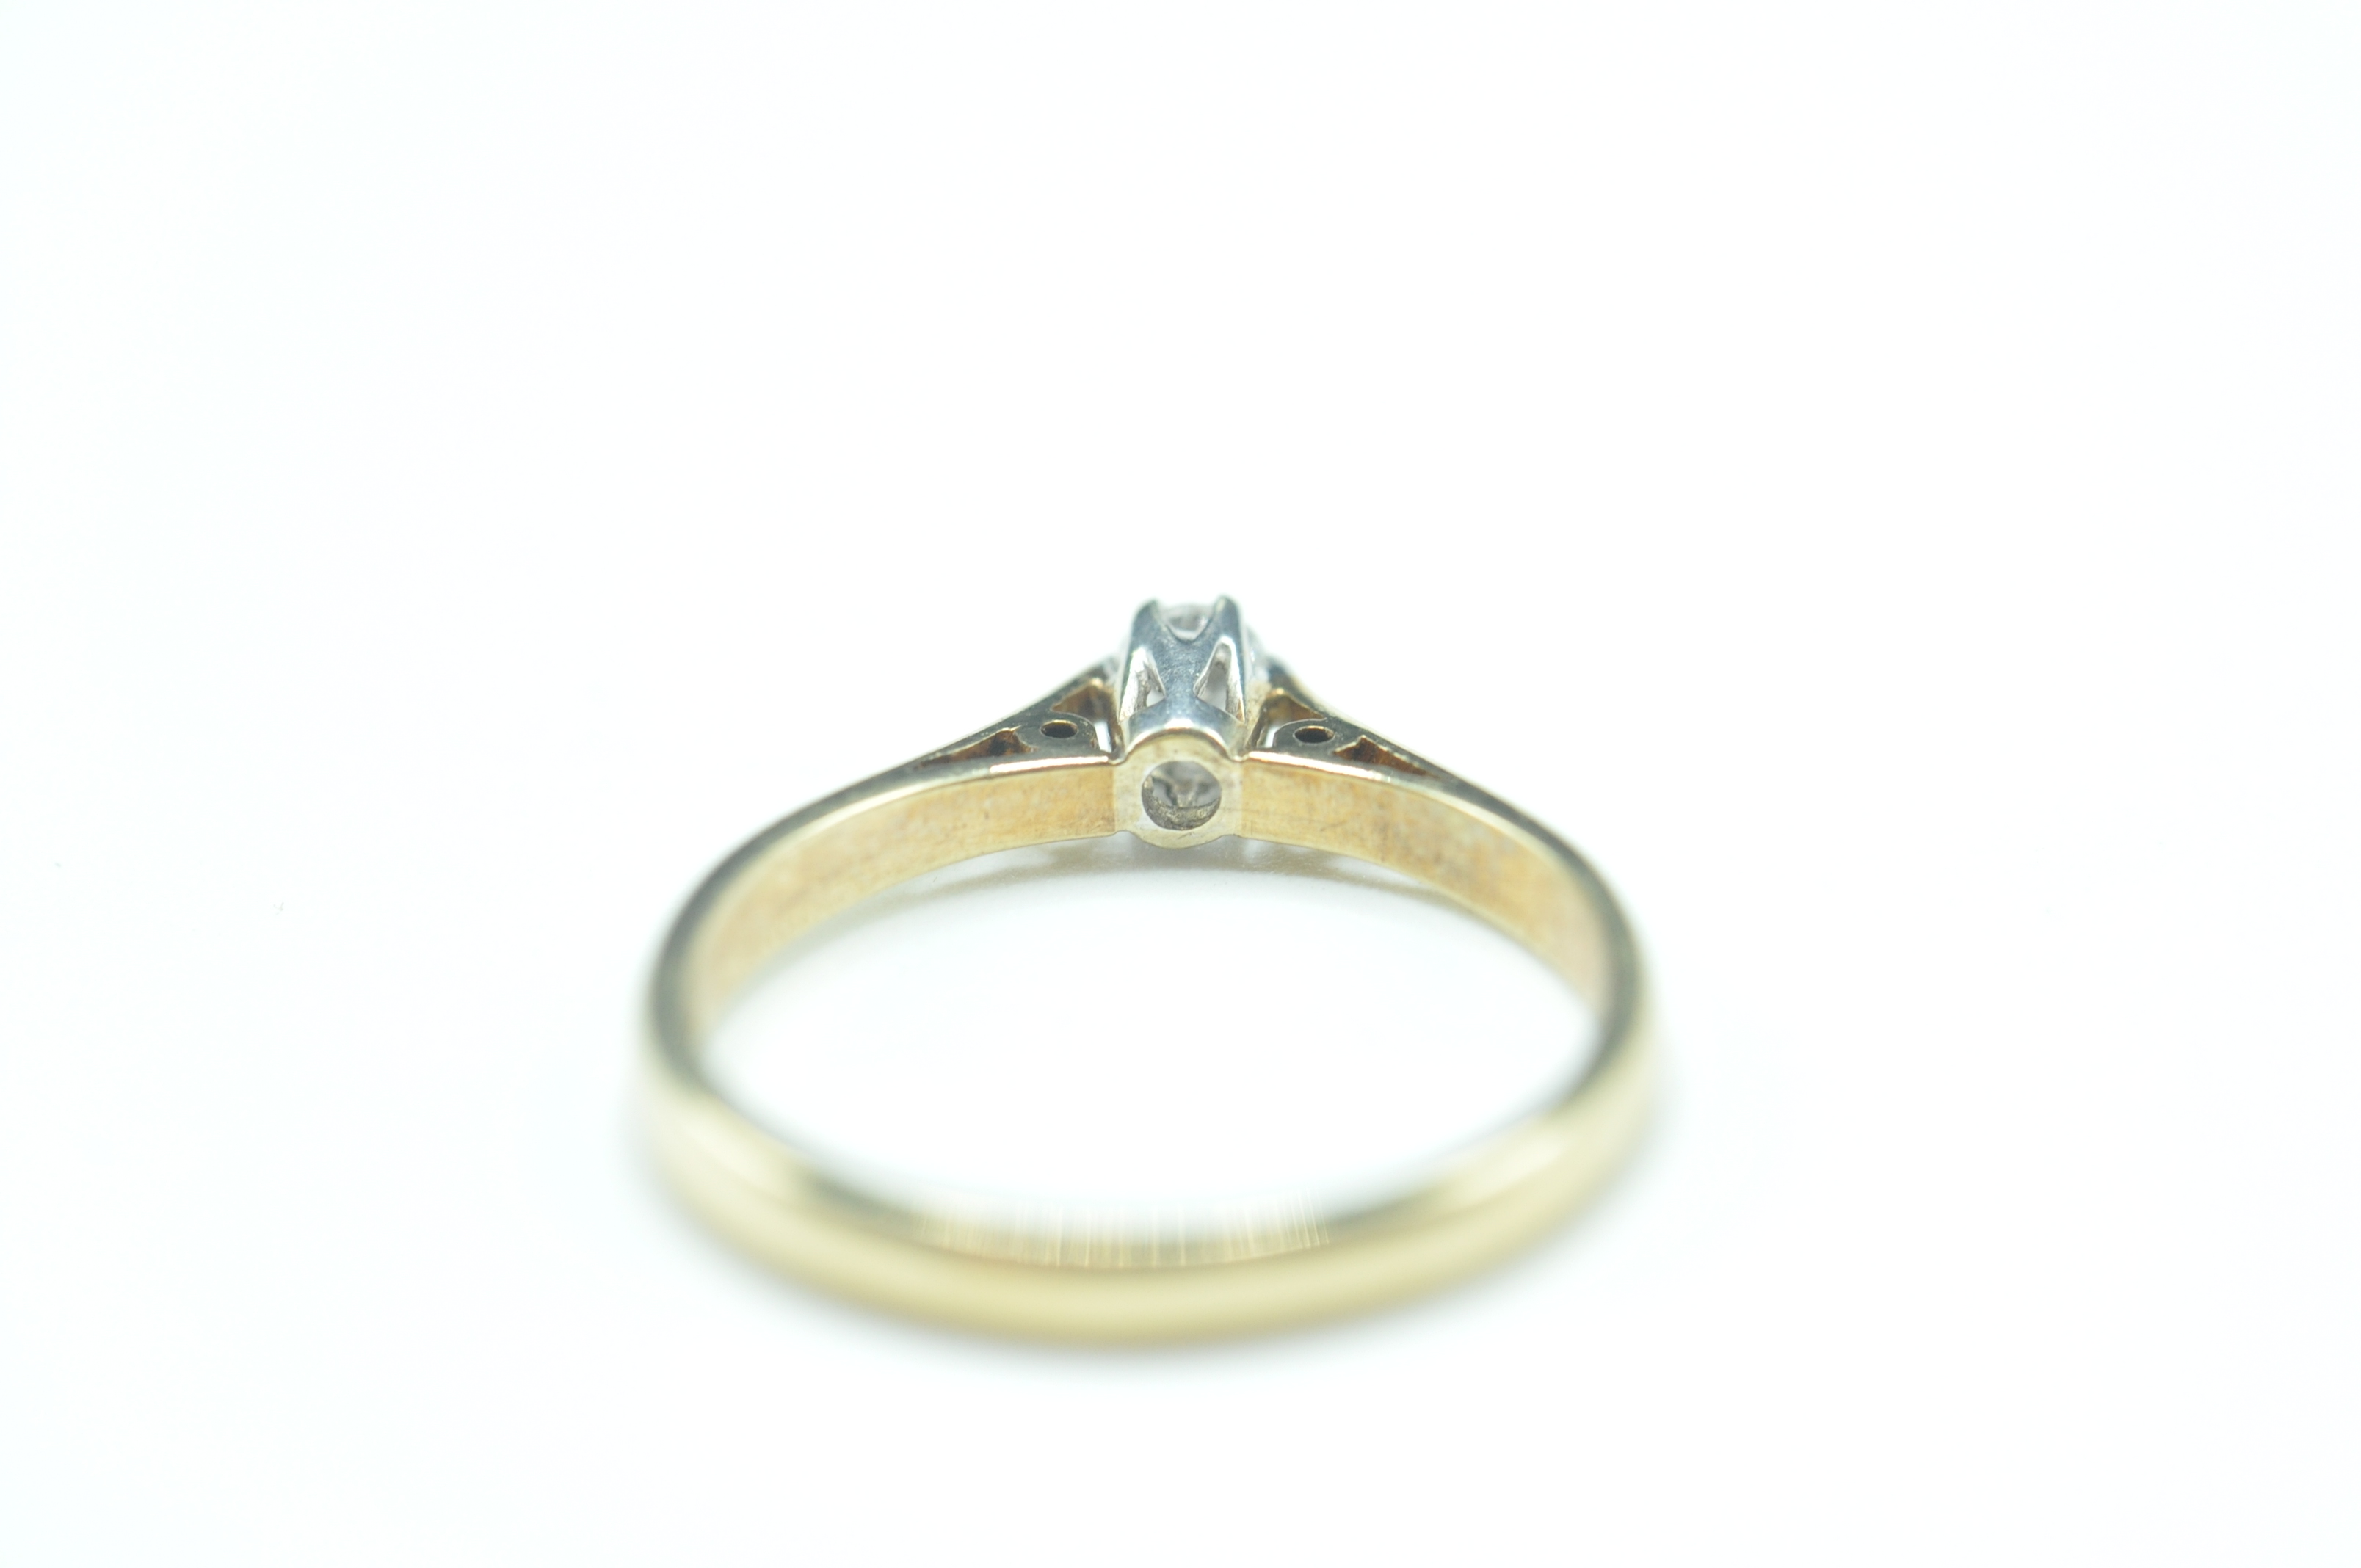 9CT GOLD AND WHITE STONE SOLITAIRE RING - Image 4 of 6